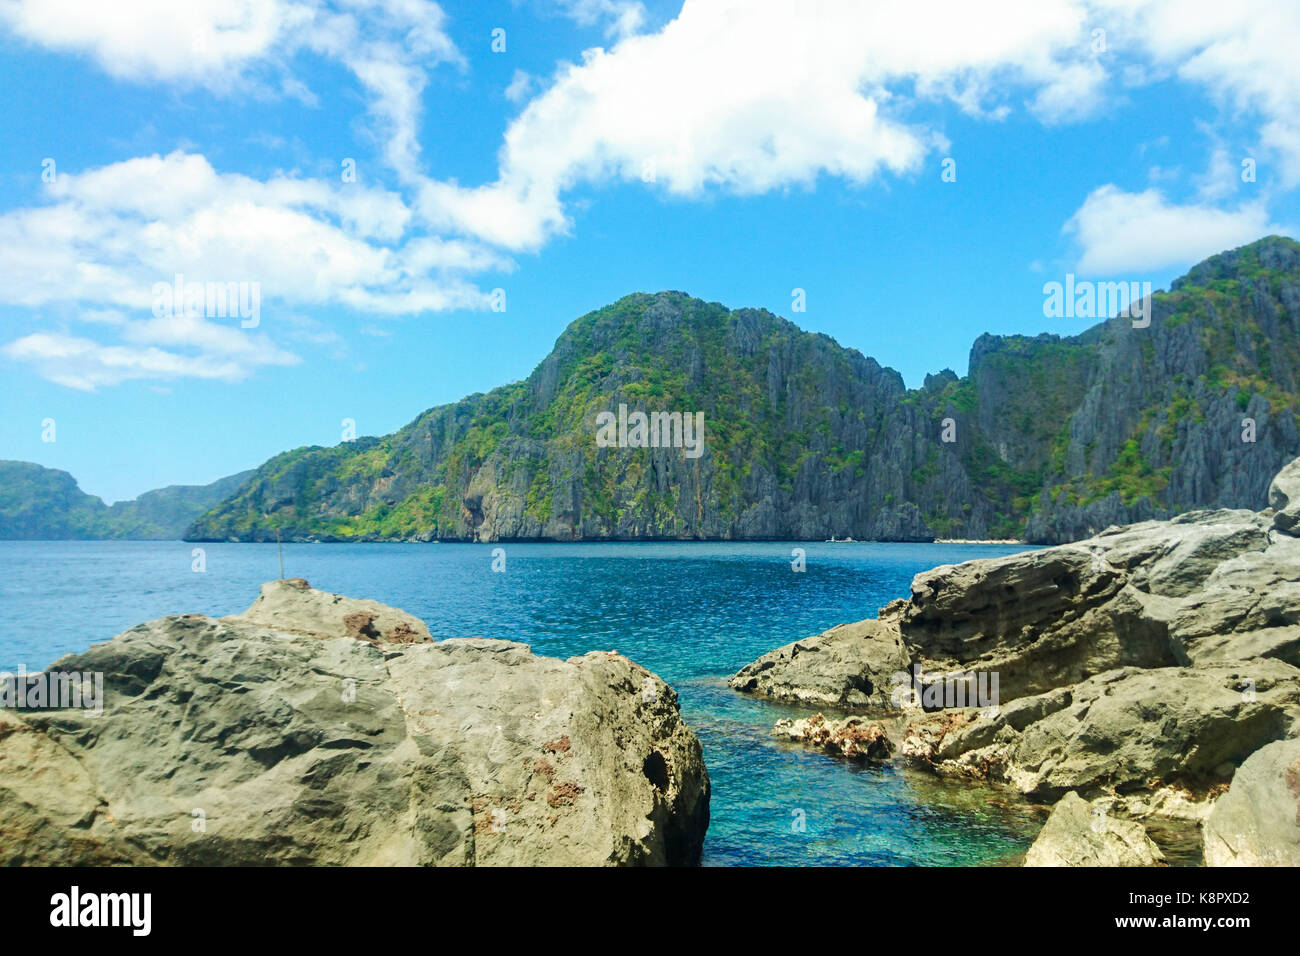 Beautiful overlooking view from the Shimizu Island, El Nido, Palawan (The Last Frontier), MIMAROPA, Philippines, Southeast Asia Stock Photo